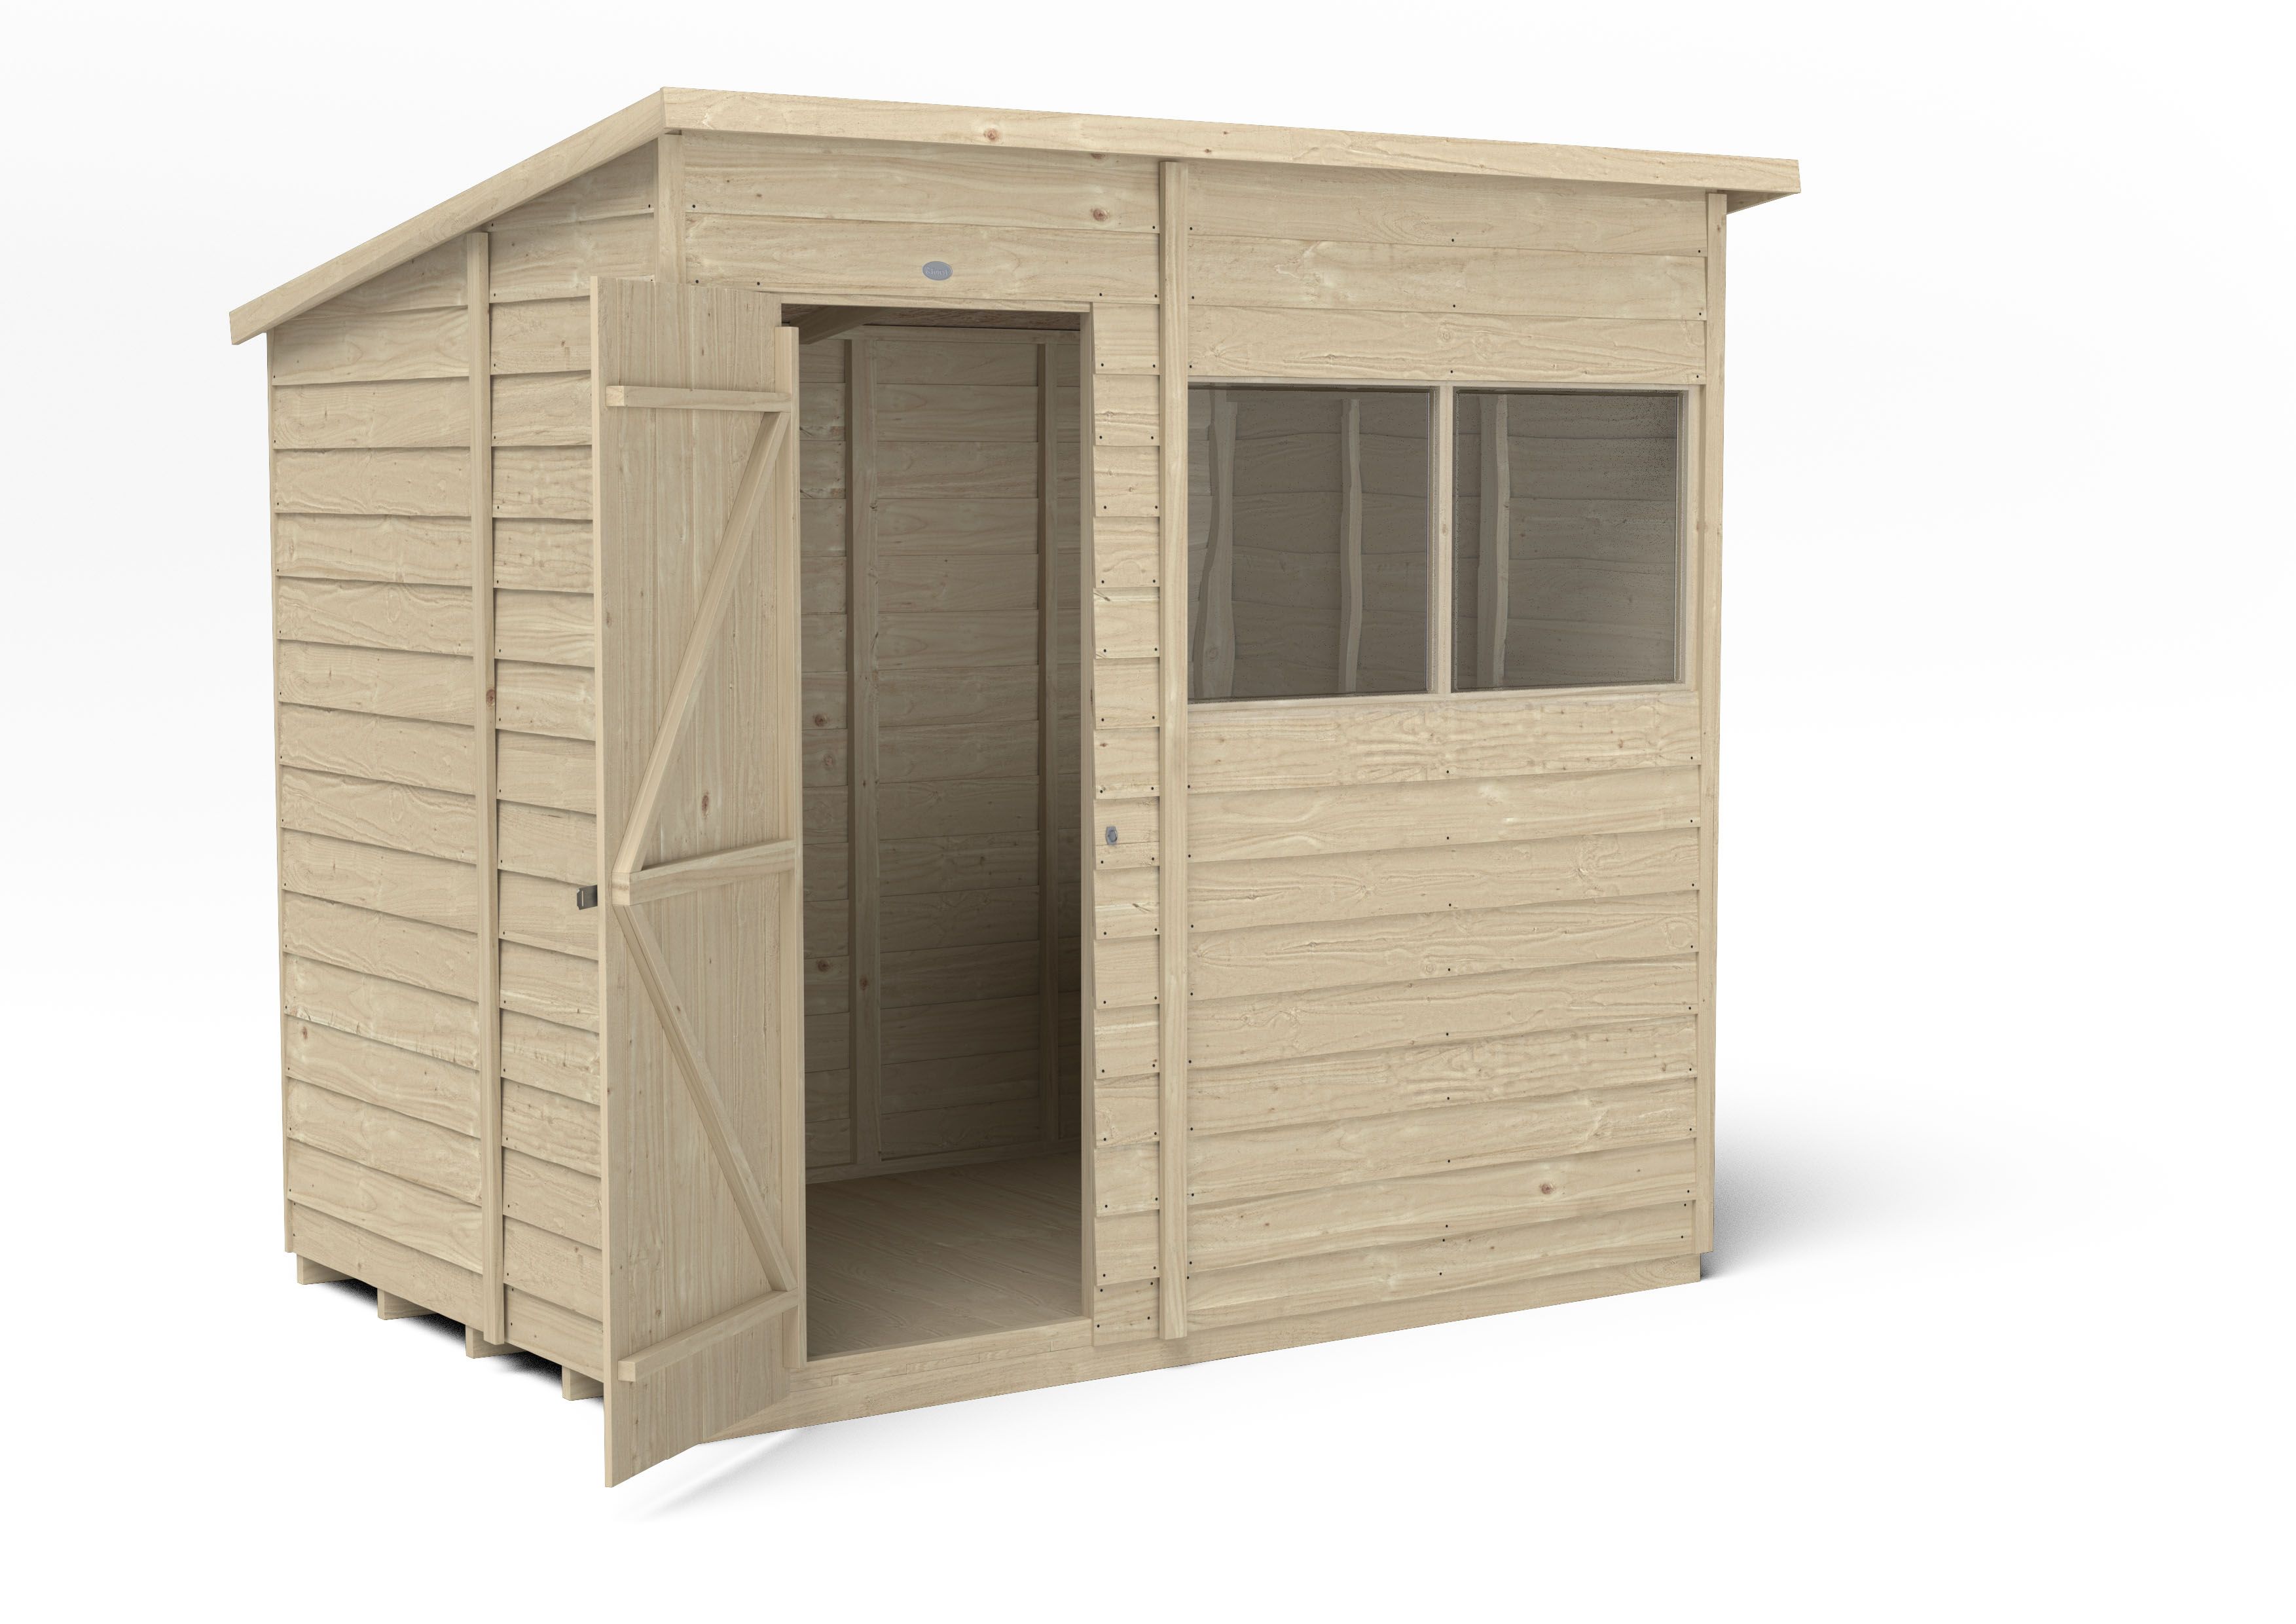 Forest Garden Overlap 7x5 ft Pent Wooden Pressure treated Shed with floor & 2 windows (Base included) - Assembly service included